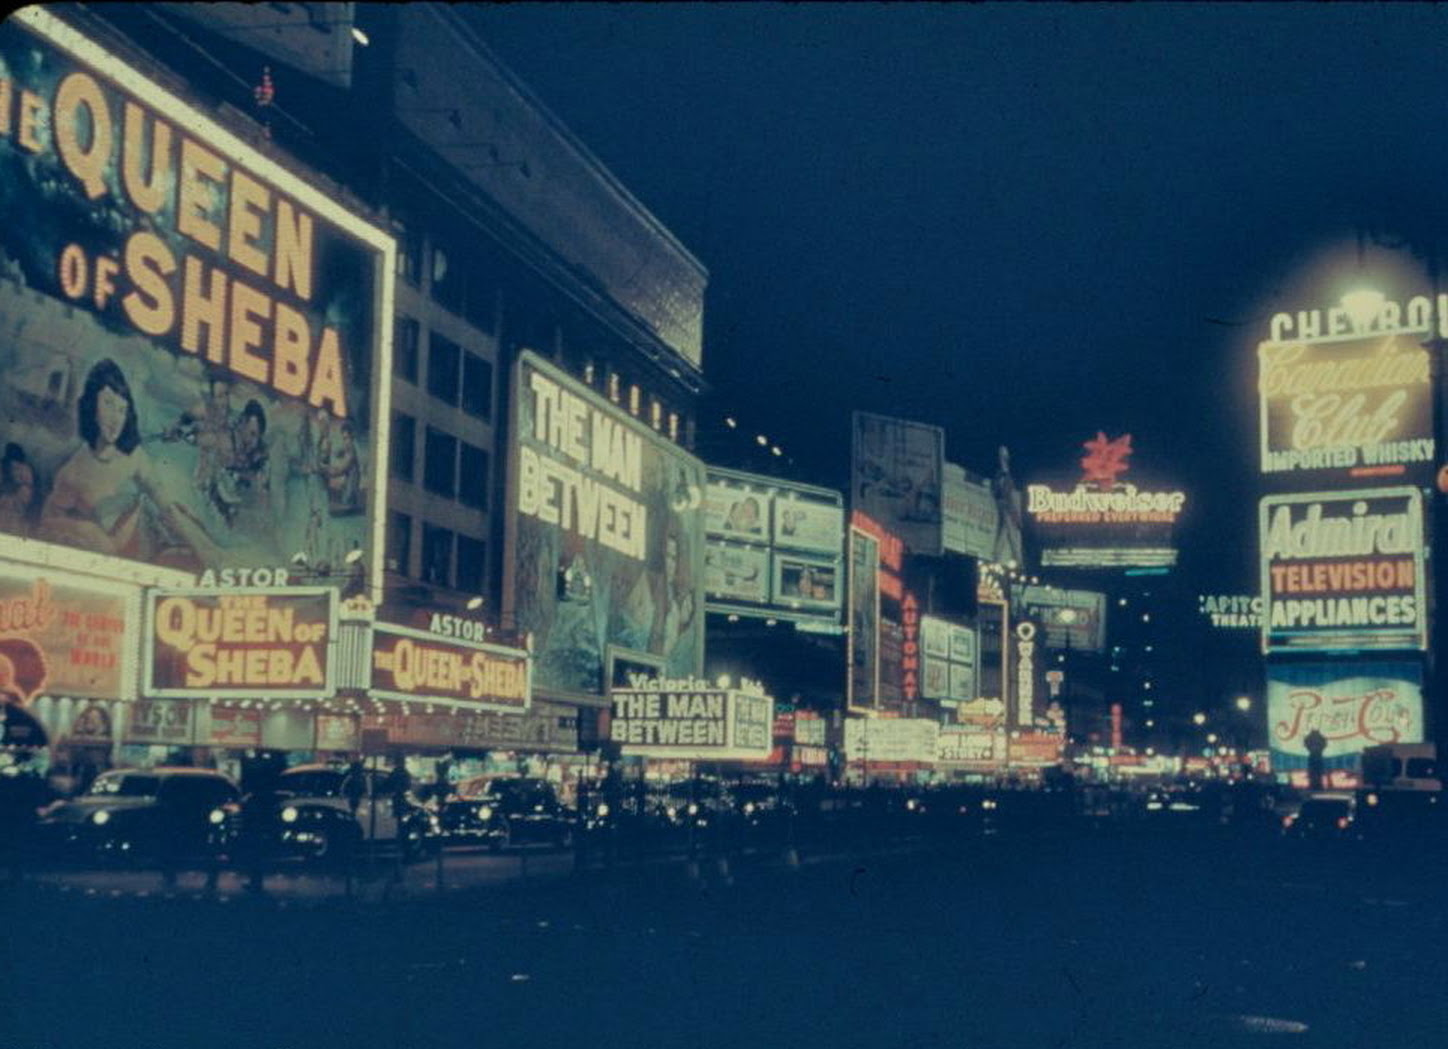 Old New York In Photos 43 Times Square Billboards